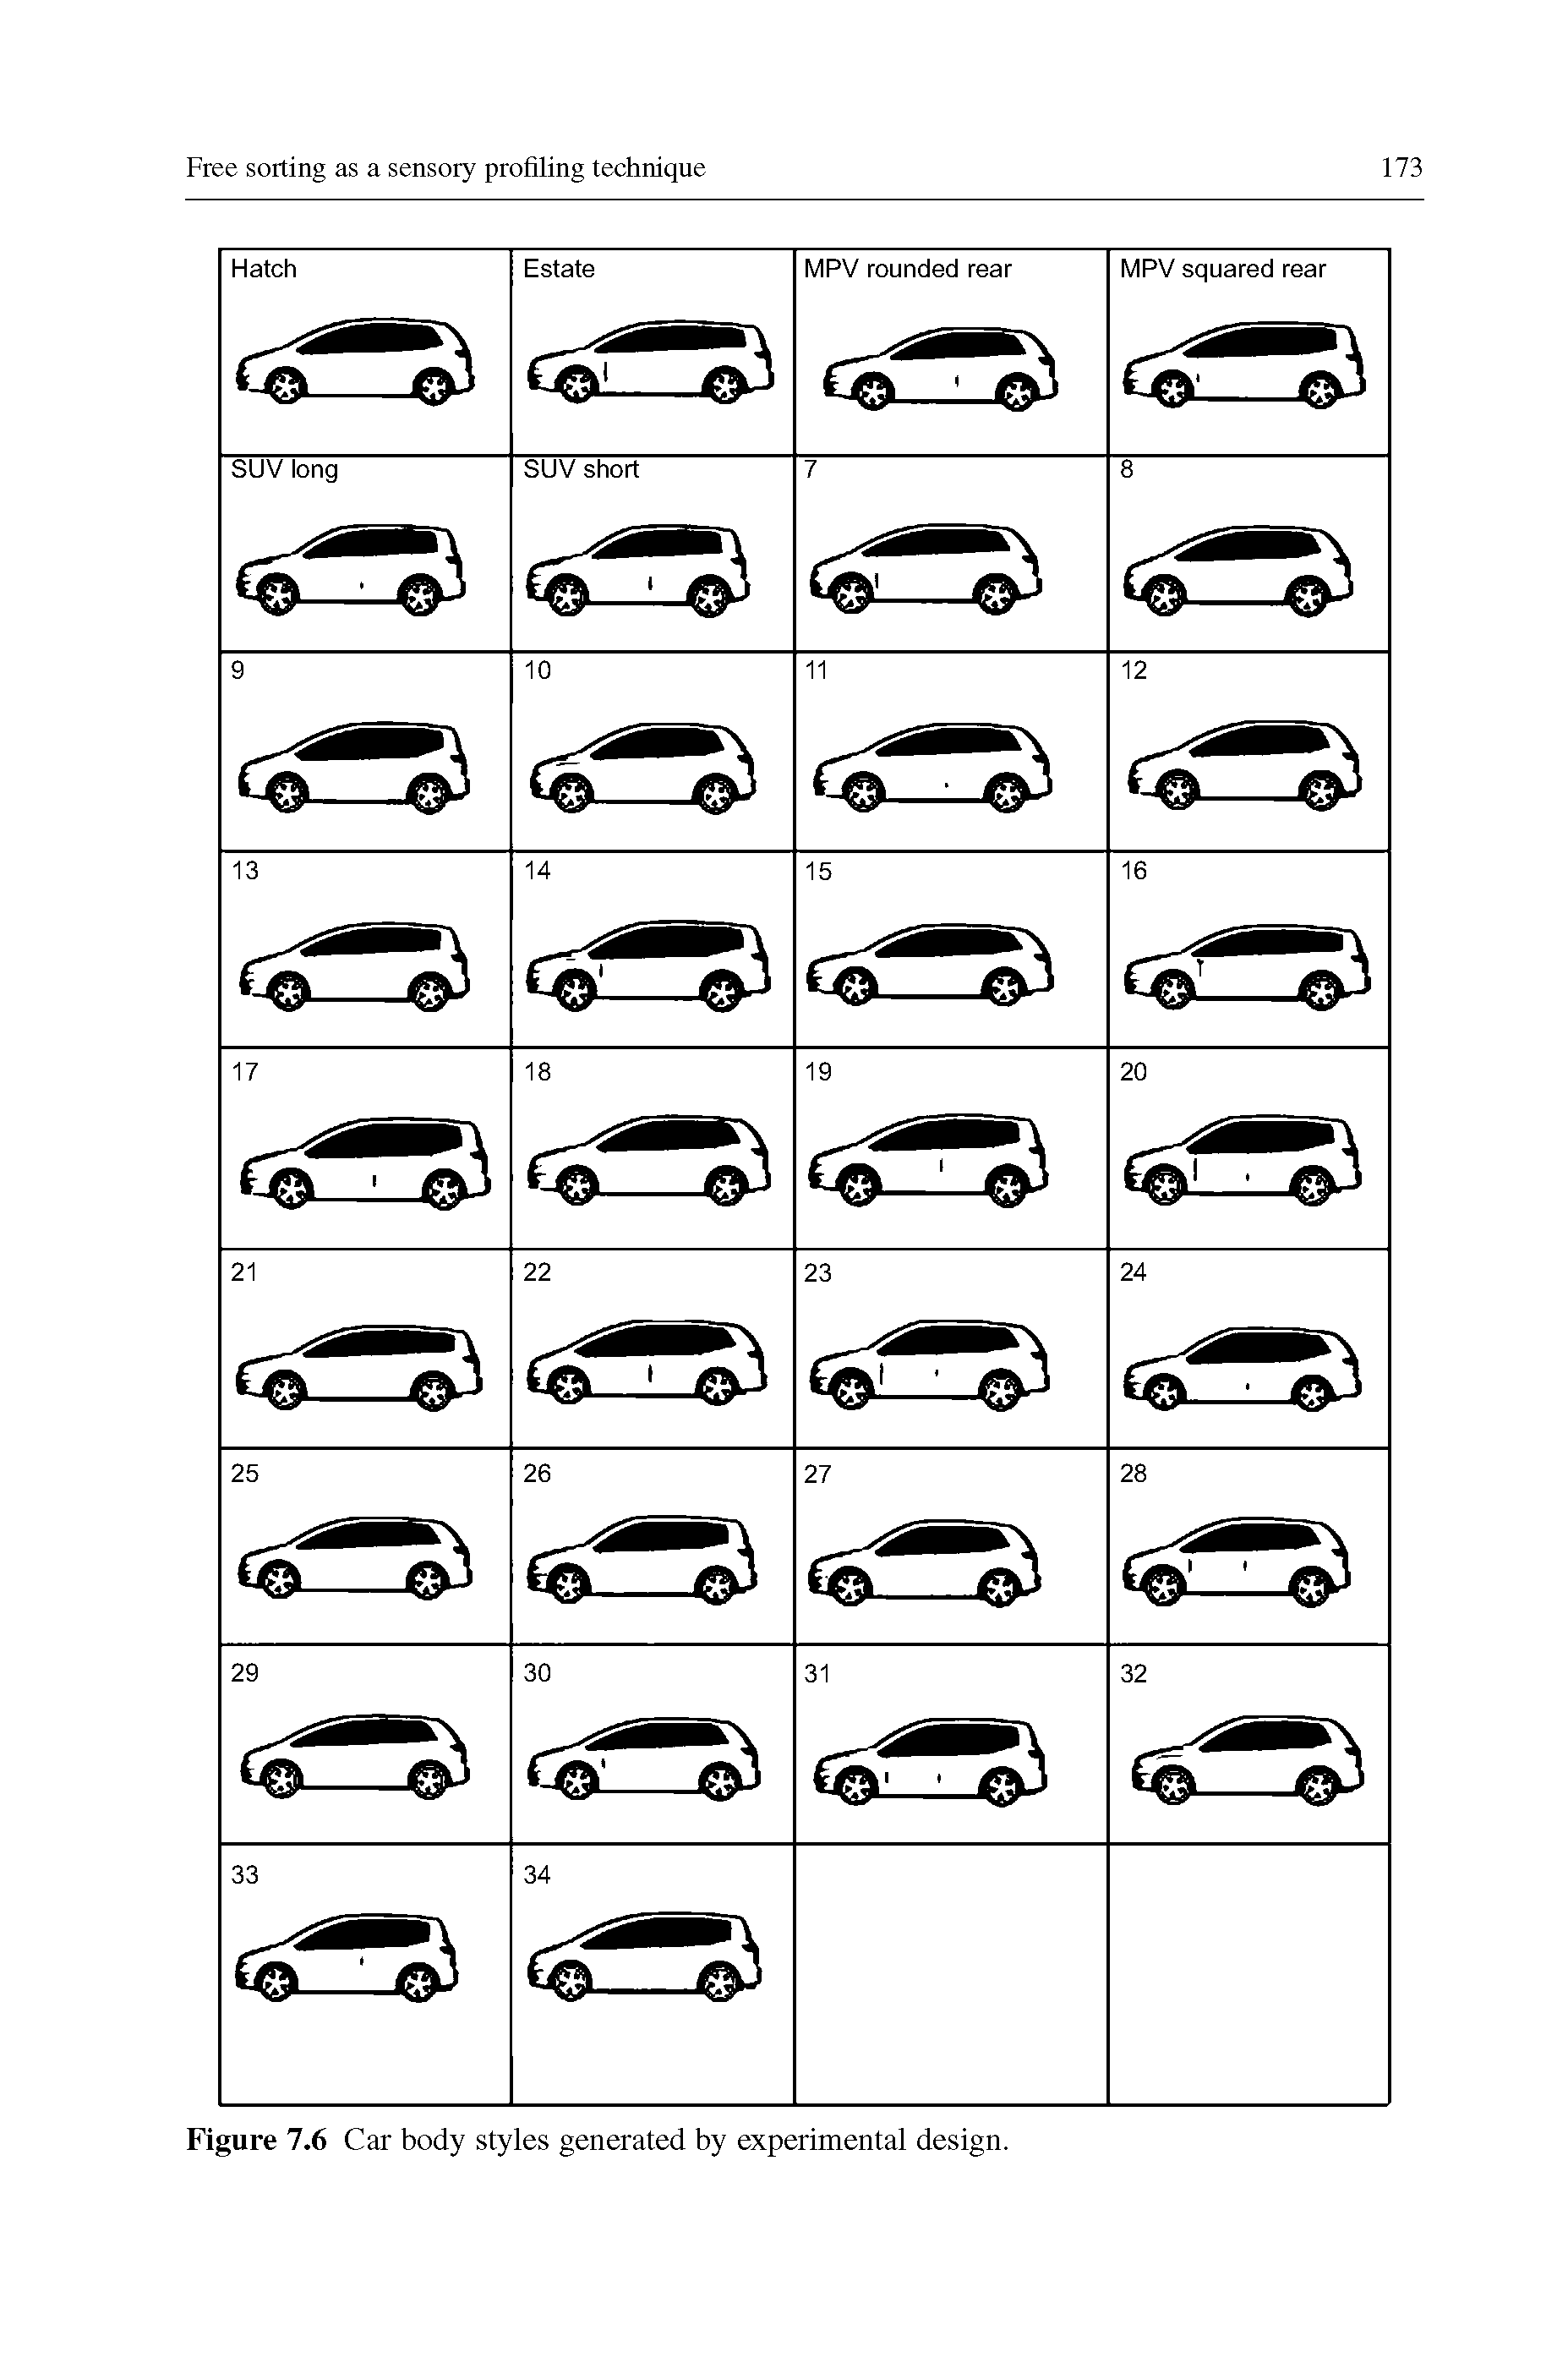 Figure 7.6 Car body styles generated by experimental design.